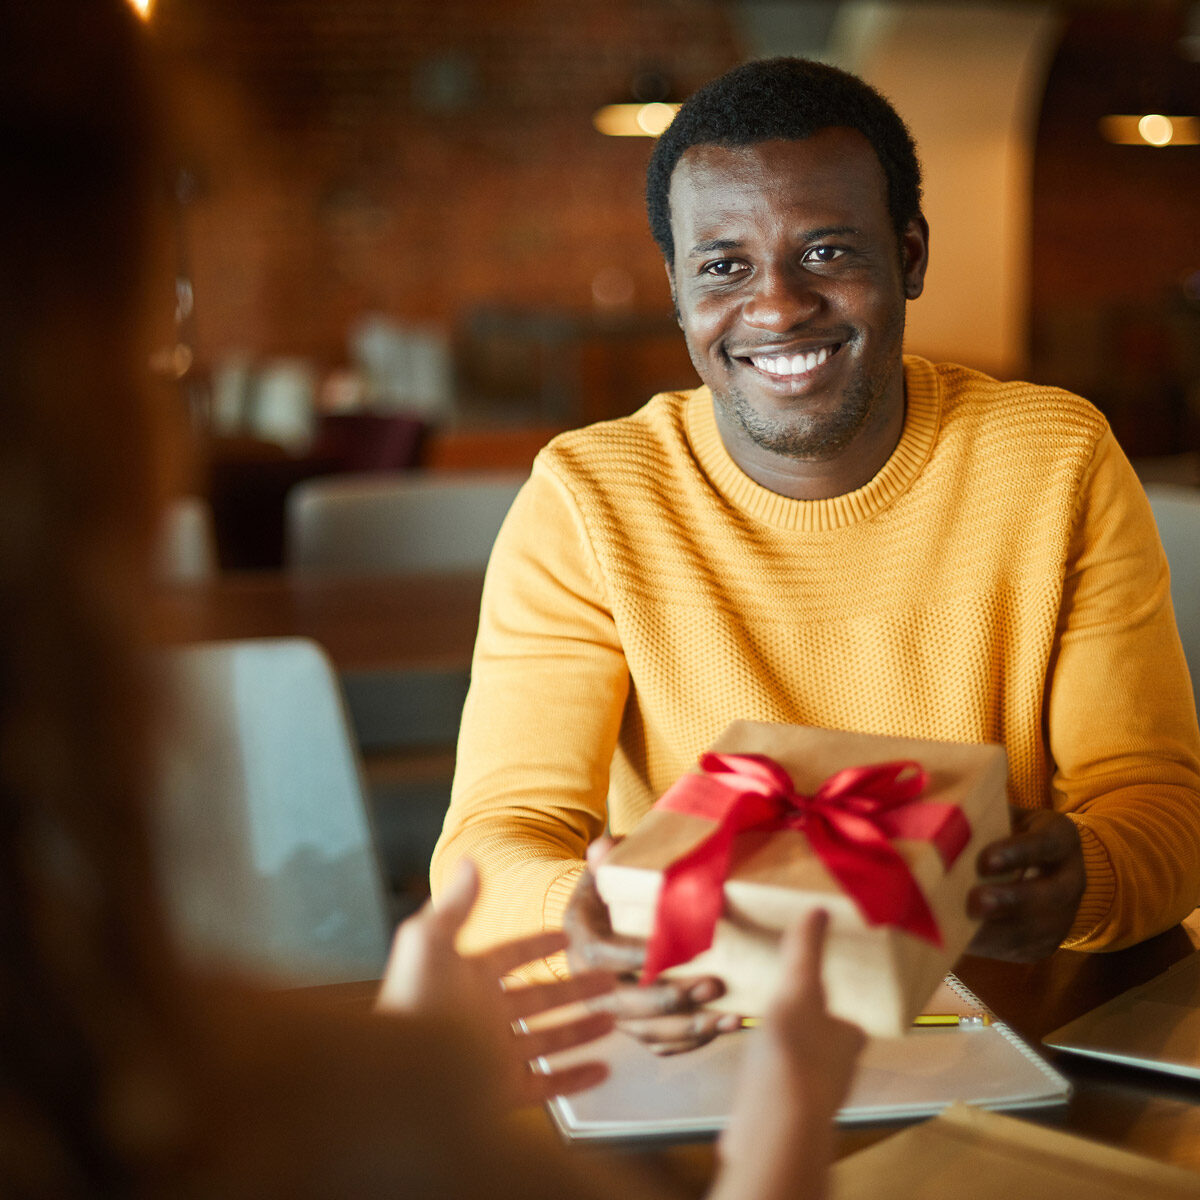 Man receiving a personalized gift from his company